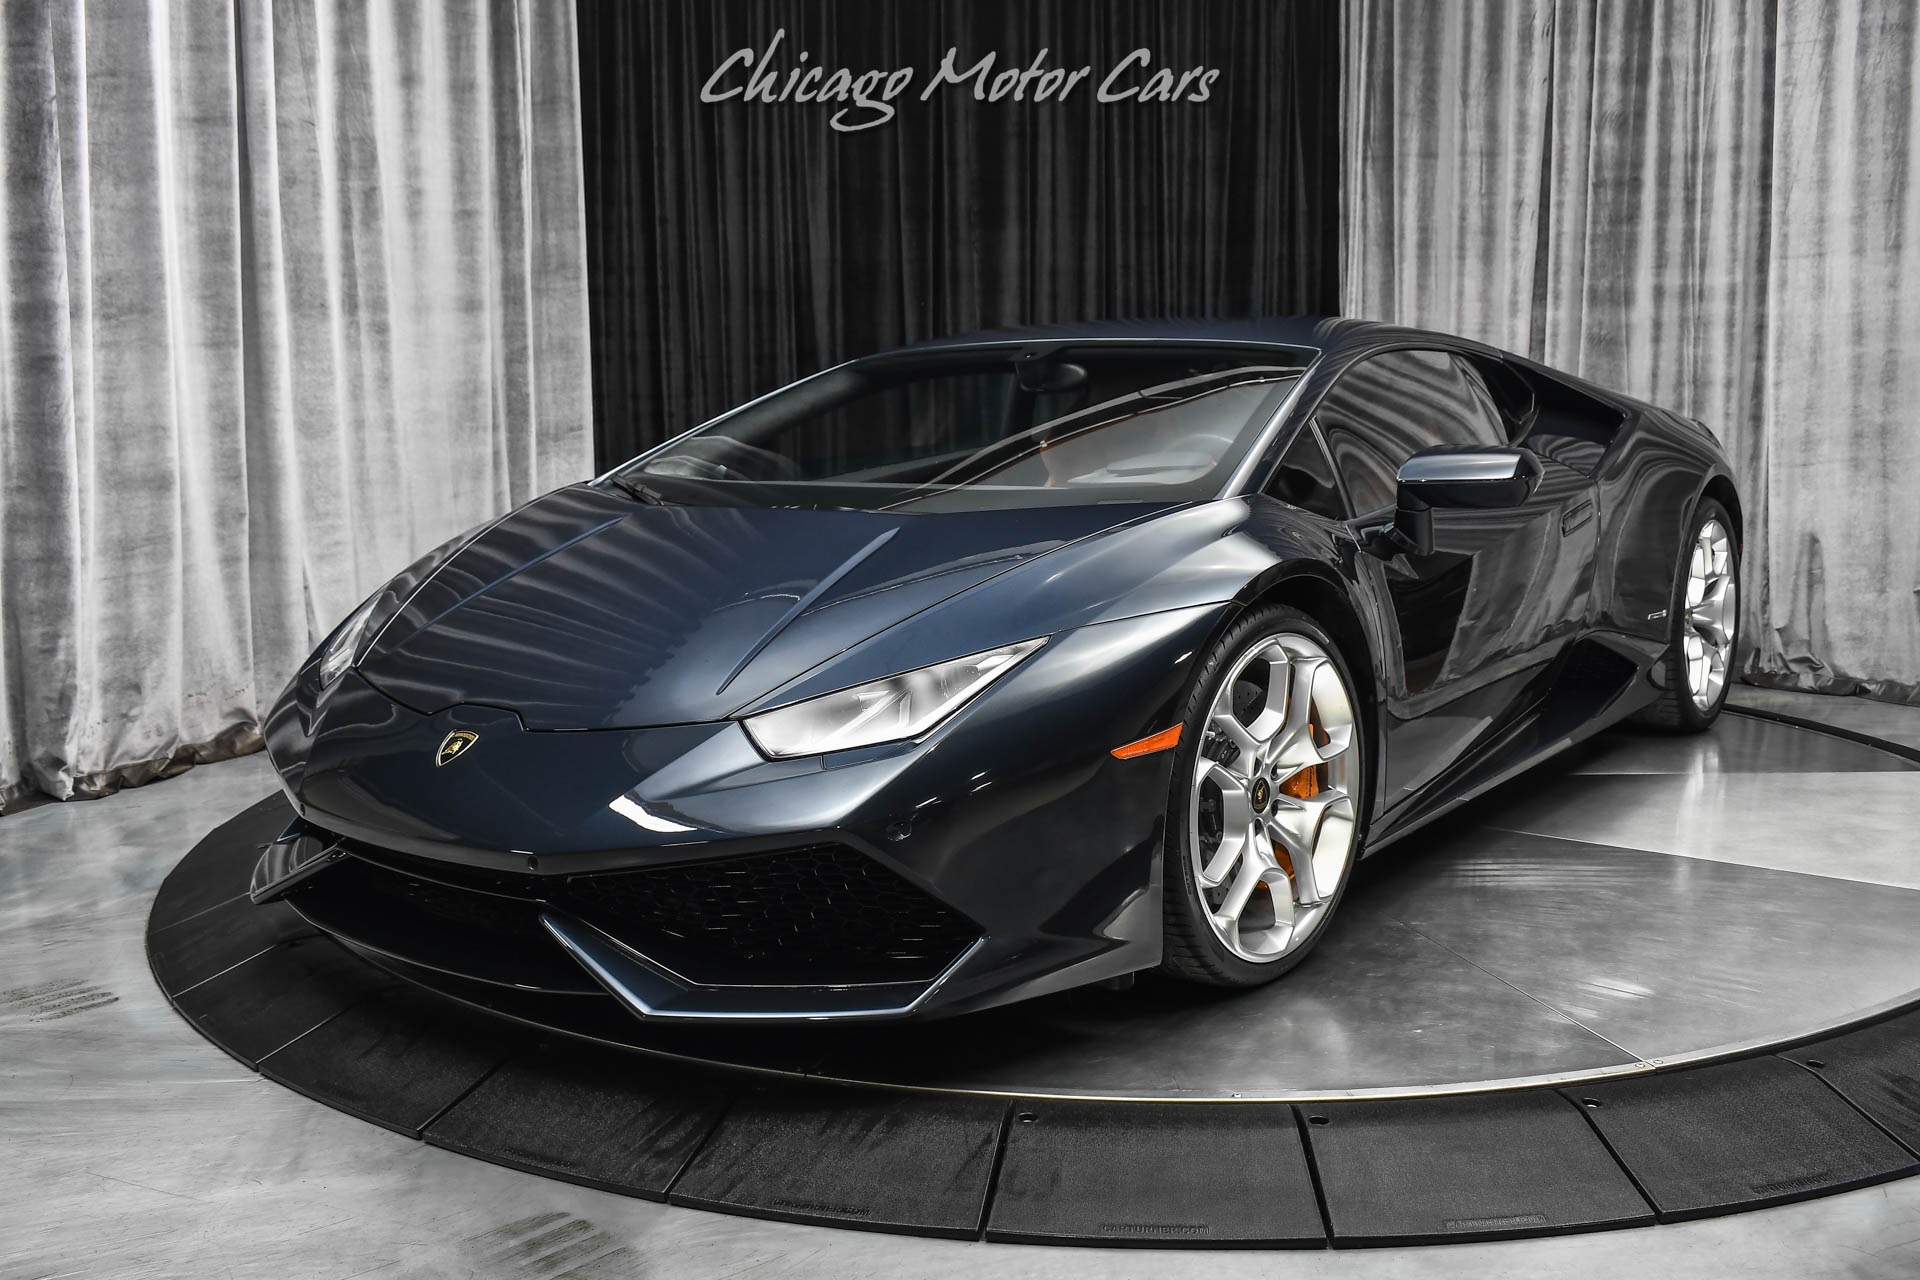 Used-2015-Lamborghini-Huracan-LP610-4-Coupe-34K-IN-OPTIONS-Front-Lift-Full-Elec-Seats-Front-PPF